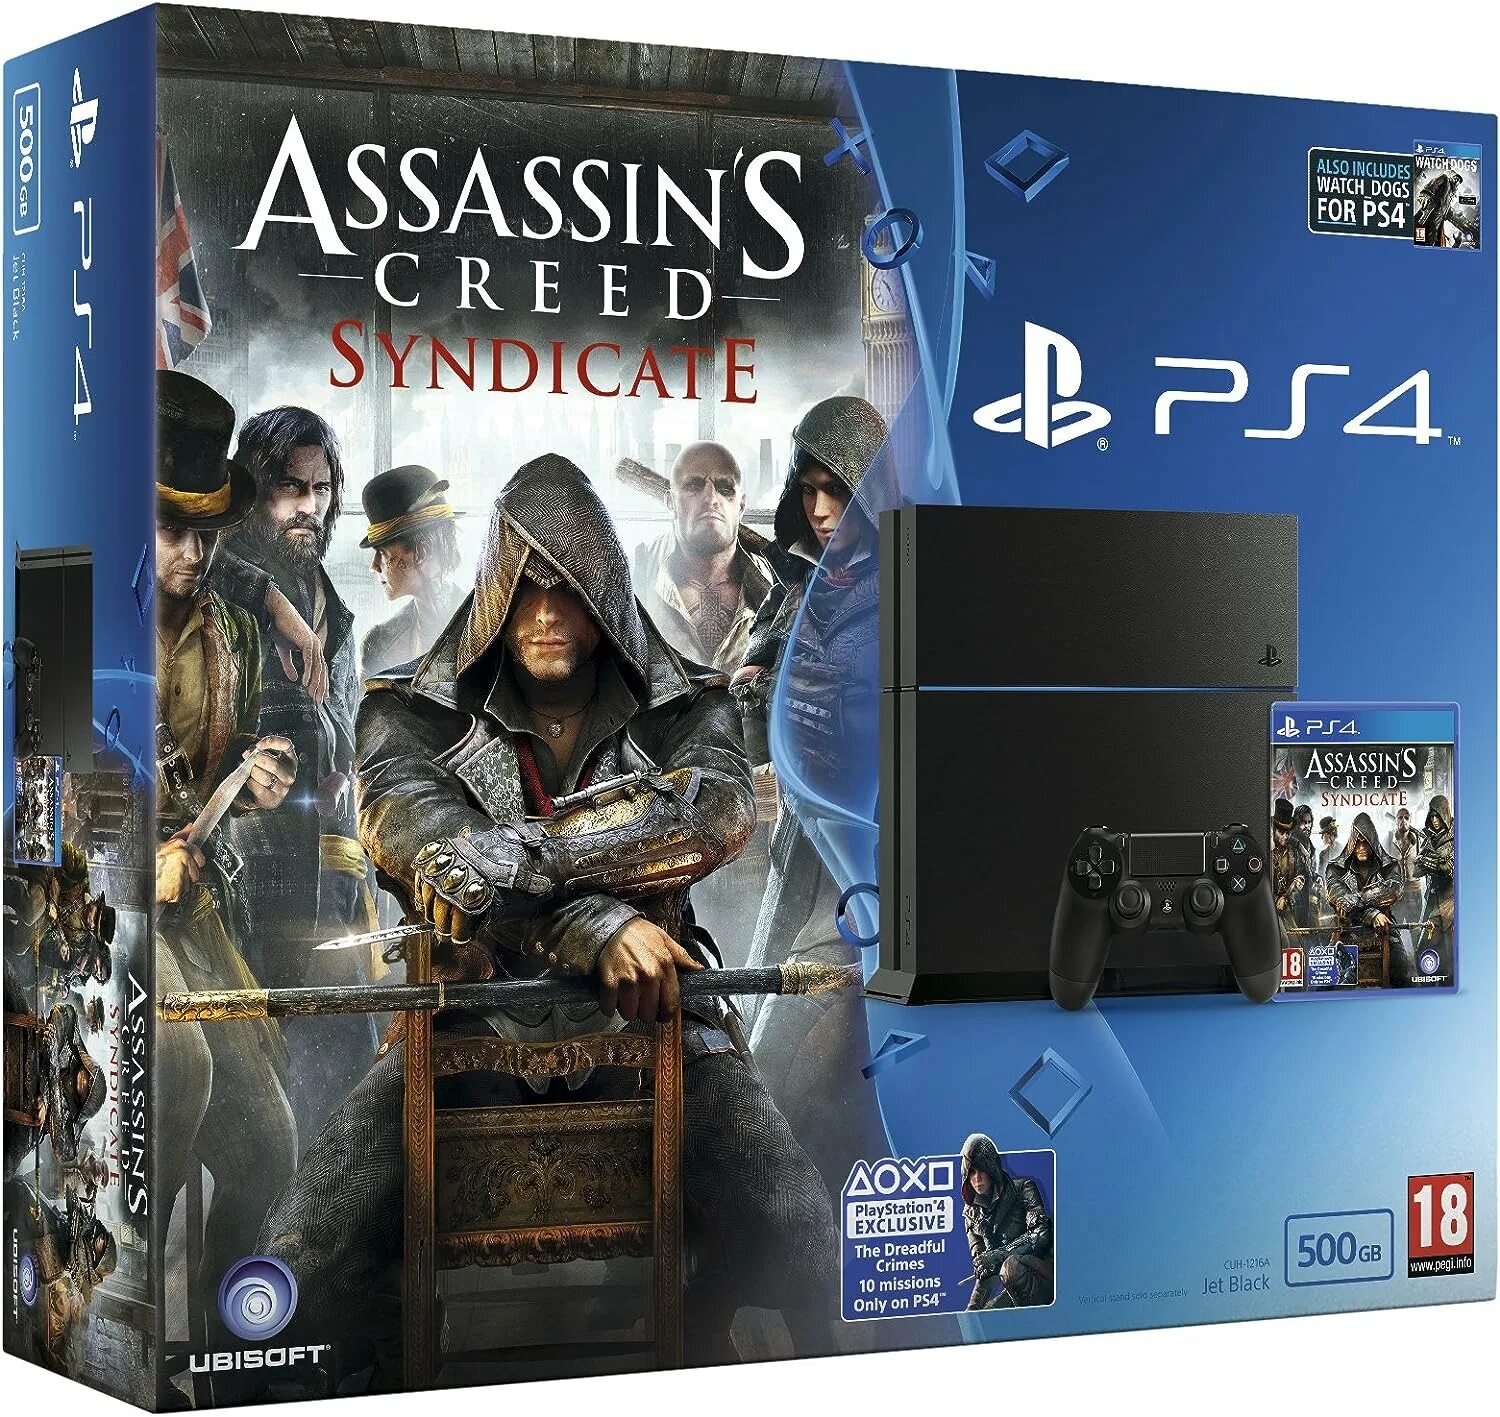 Ps4 диск Assassins Creed 1. PLAYSTATION 4 диски ассасин 2. Ассасин Крид Синдикат диск ПС 4. Assassin's Creed Синдикат ps4 диск. Ps4 читать